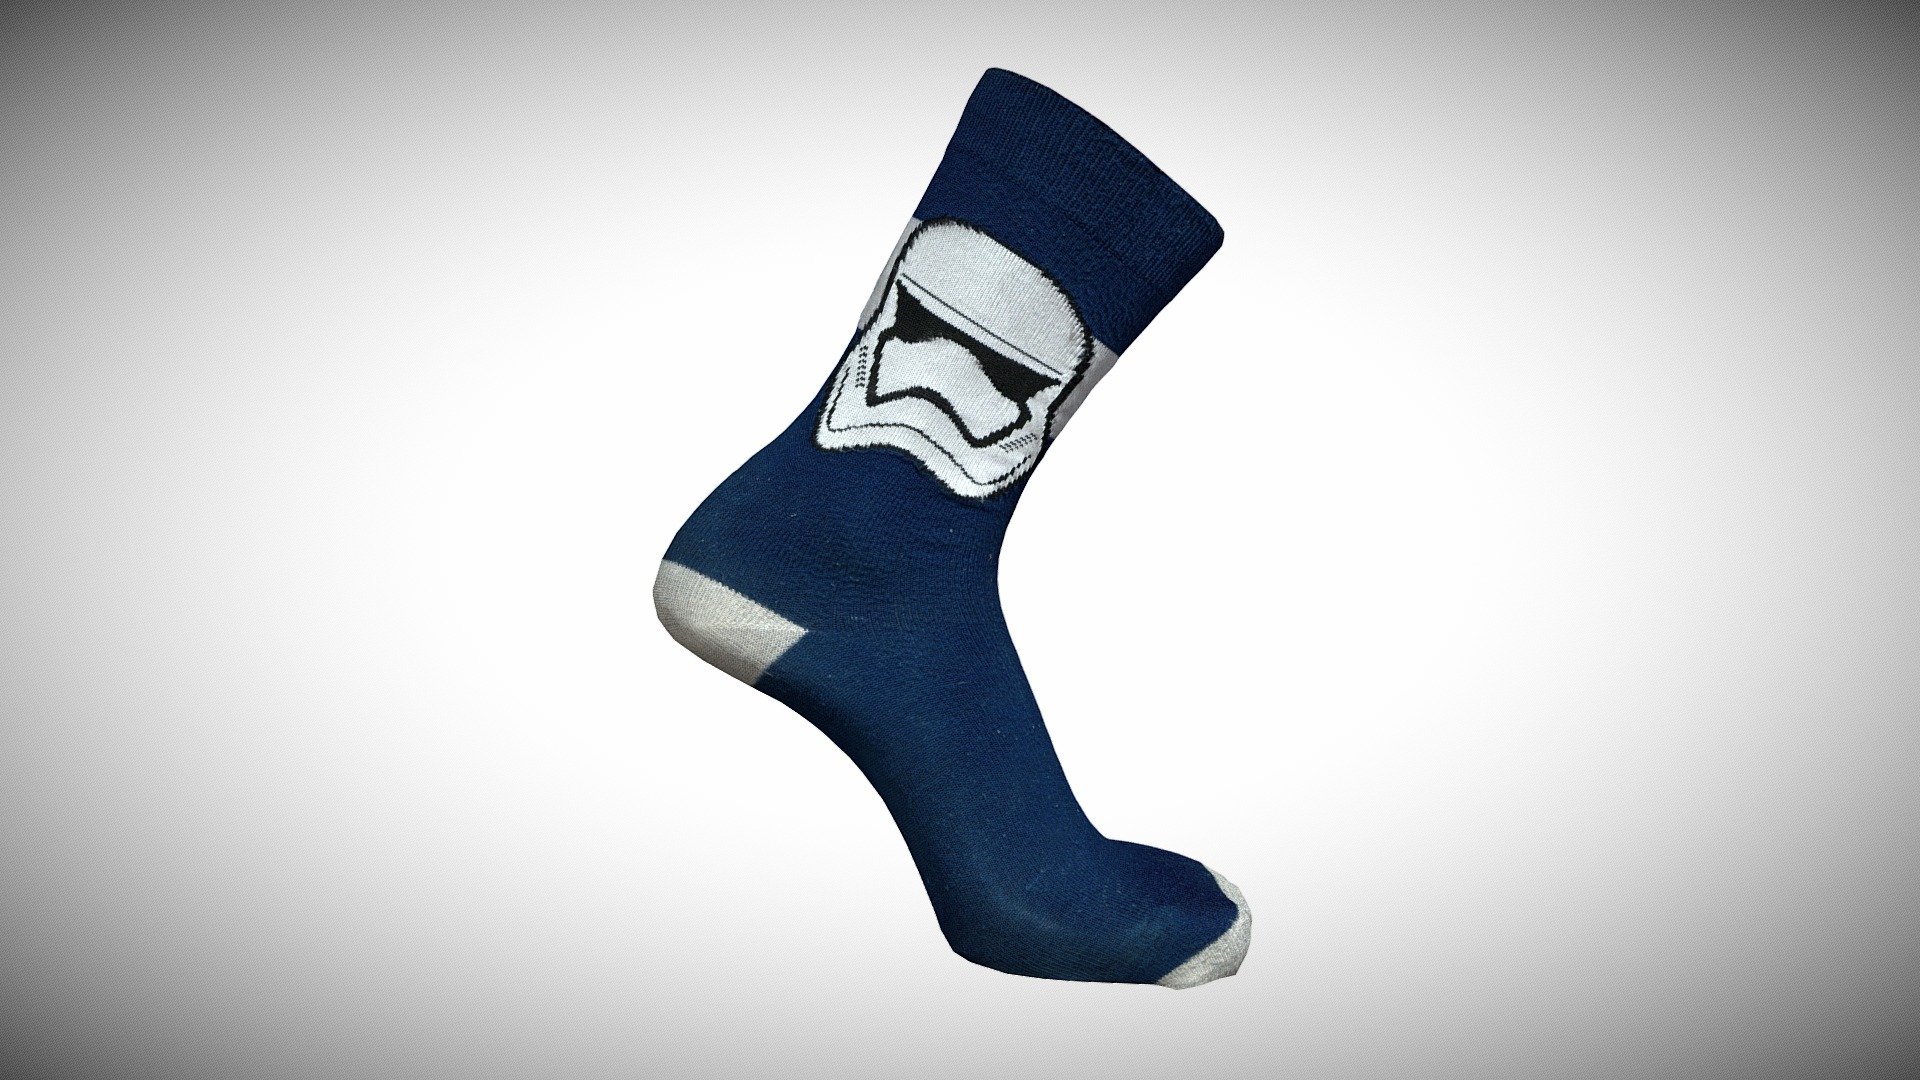 Star Wars sock 3D scanned using a custom 3D scanning rig. Total scanning and processing time: 14 minutes 3d model